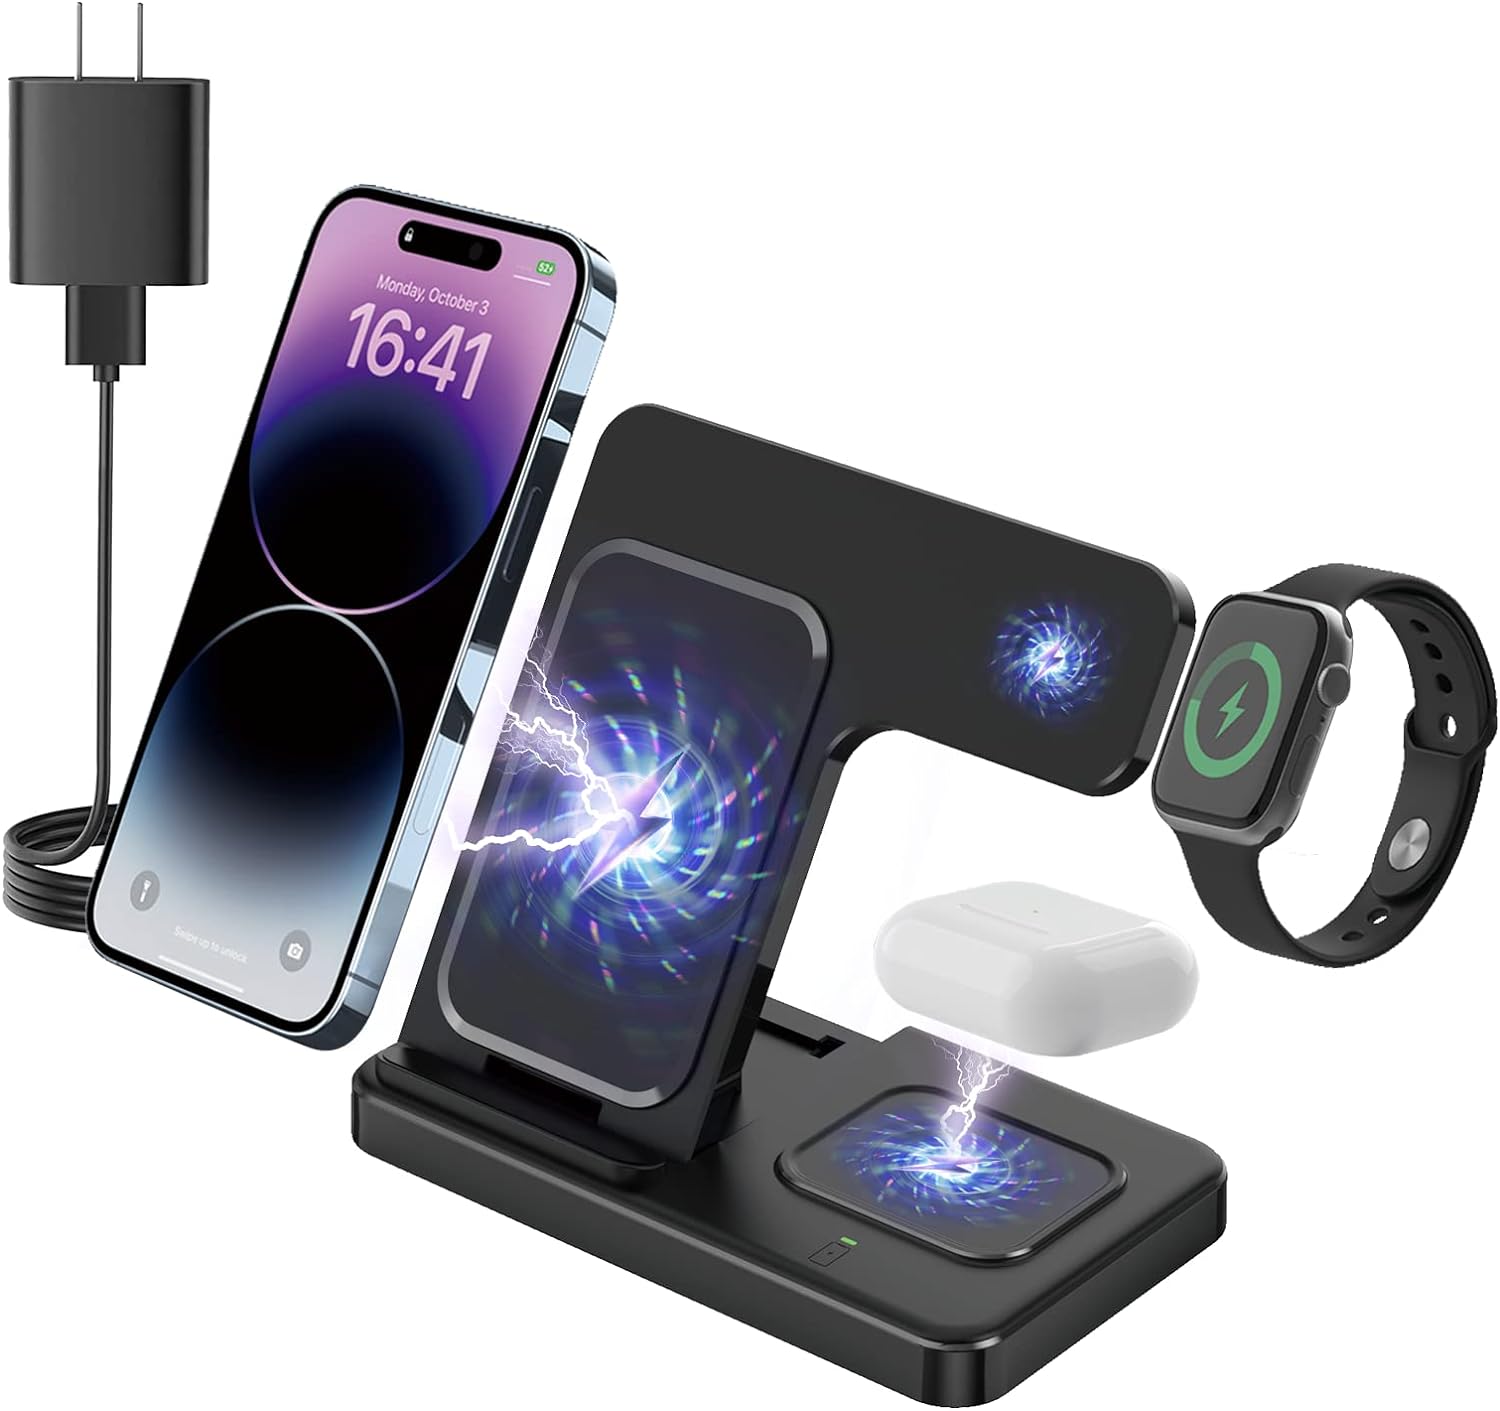 iPhone Wireless Charger Fast Charging 3 in 1, Wireless Charging Station for iPhone/Iwatch/Airpods, Portable Cell Phone Charging Stand for Multiple Devices, Charging Pad for Desk, Travel, Office, Home